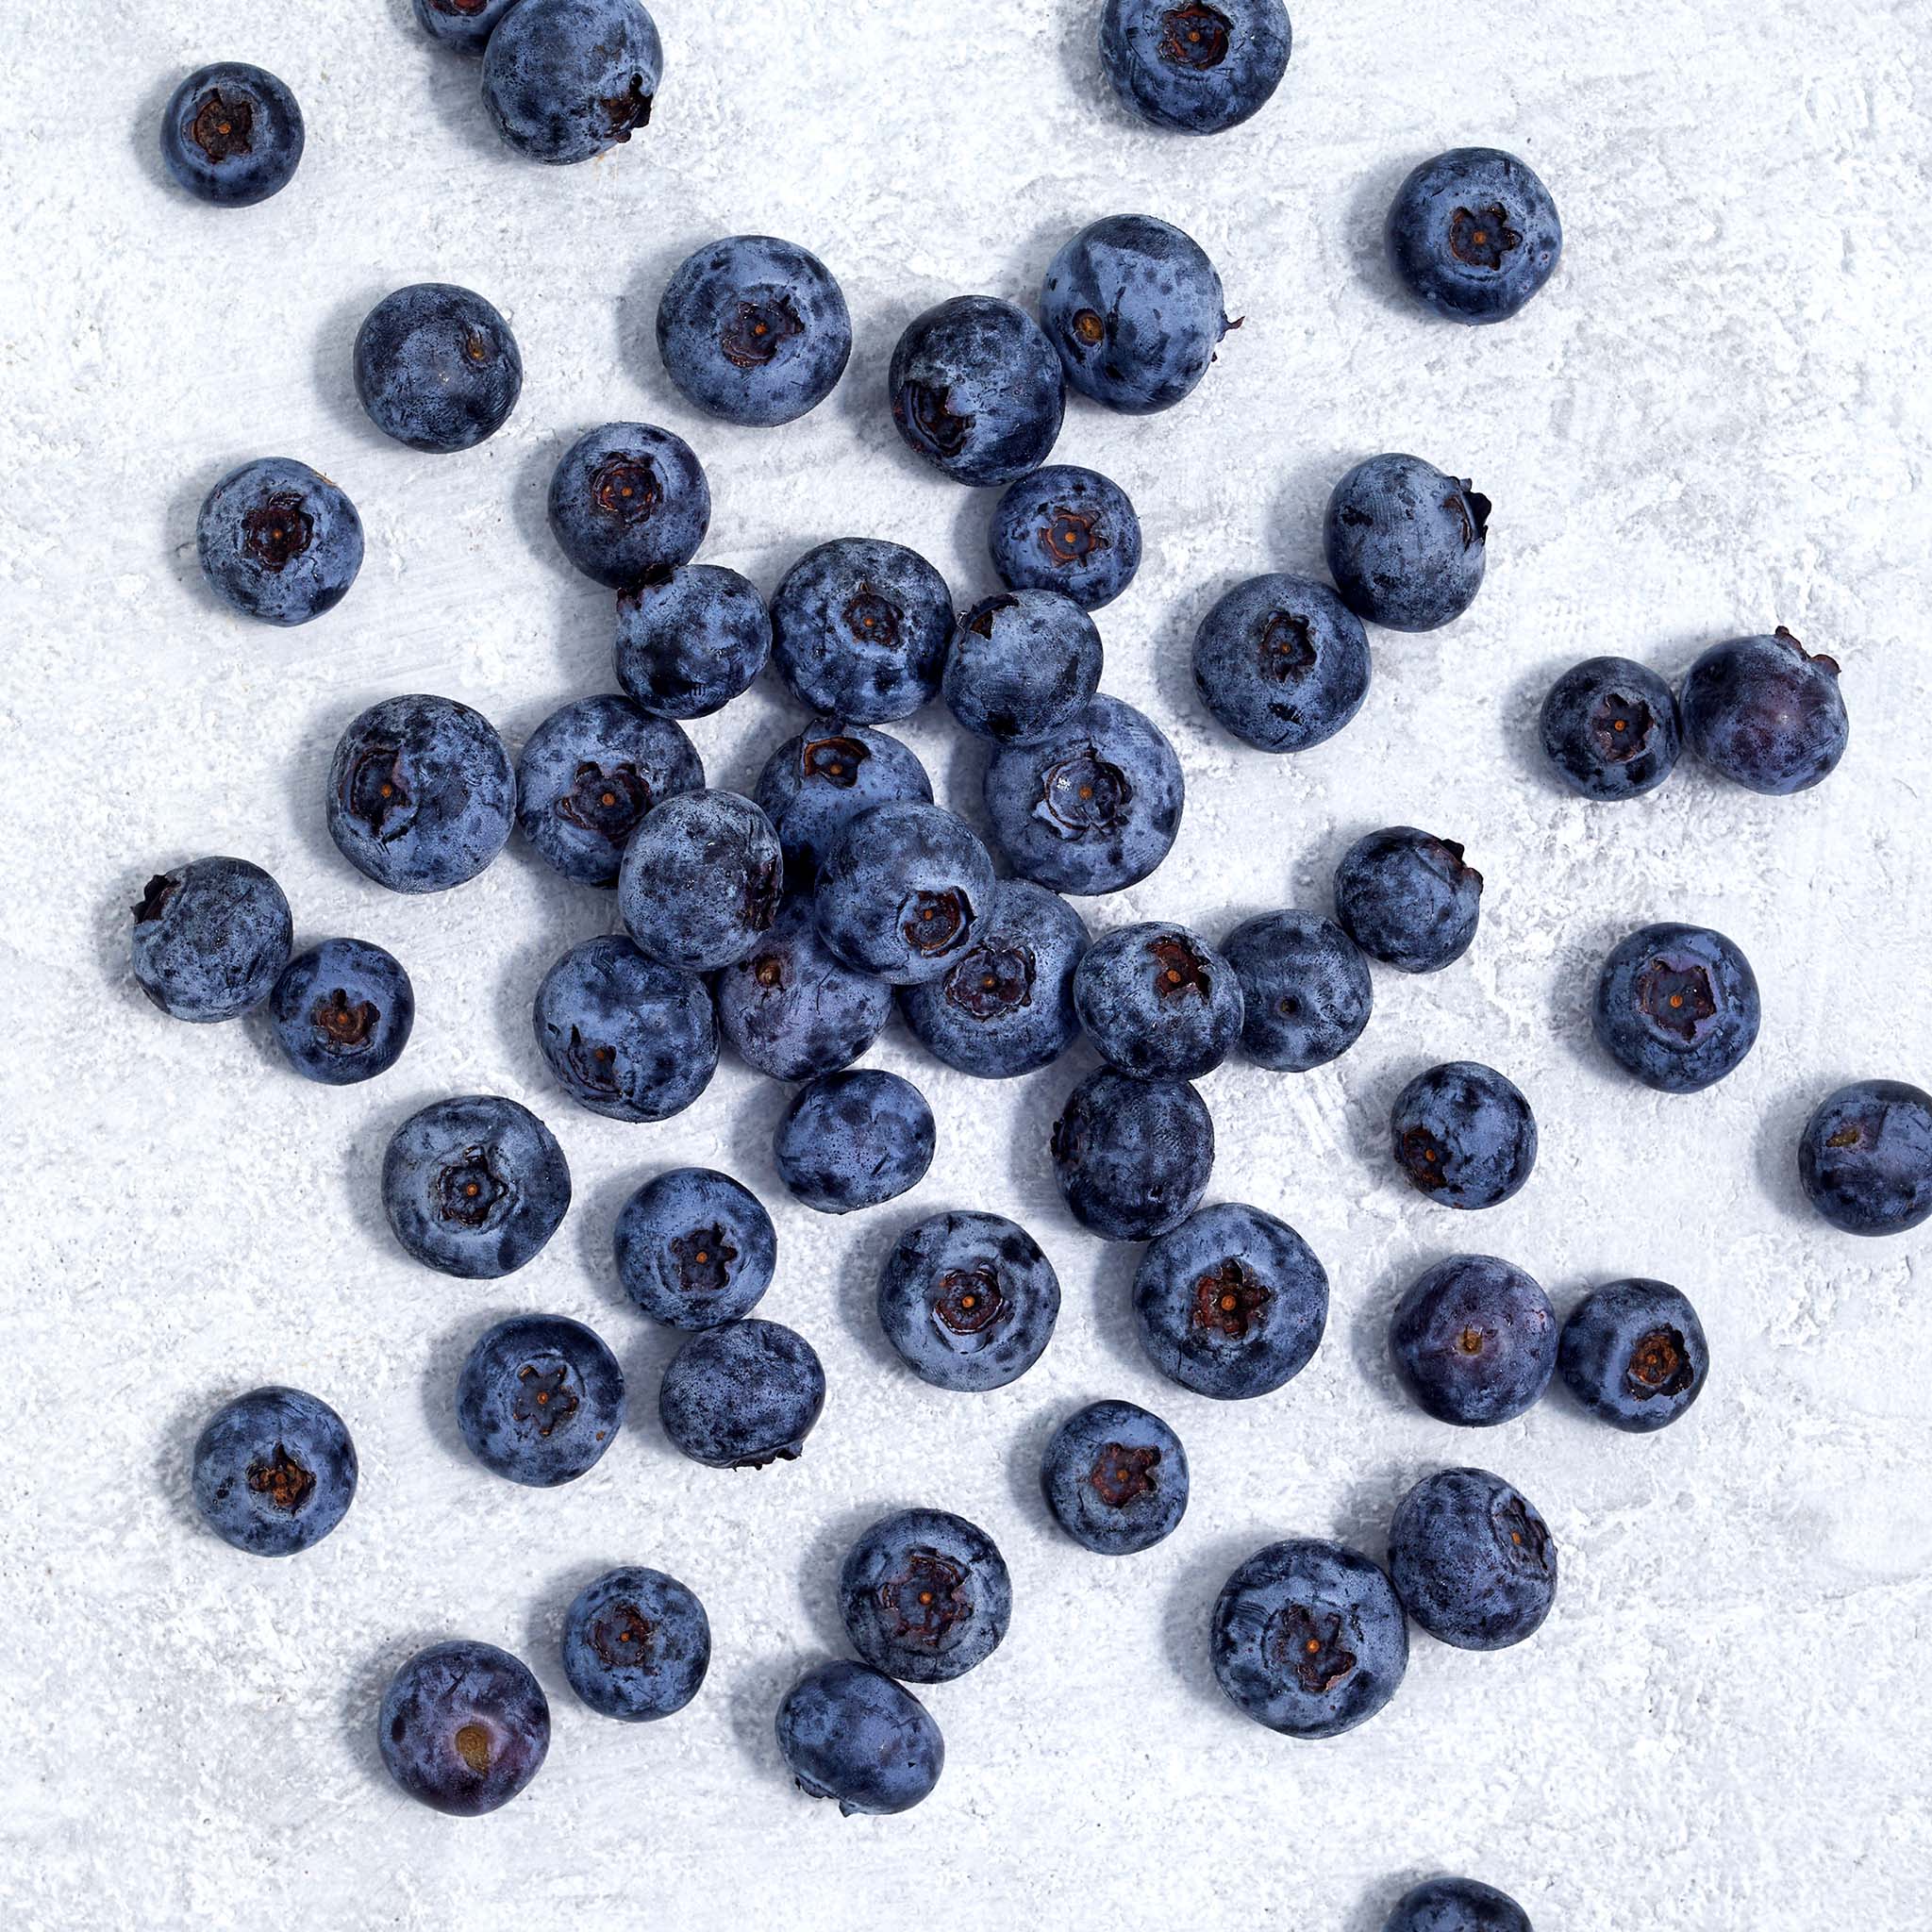 7032 blueberries 75lbs IQF 0012